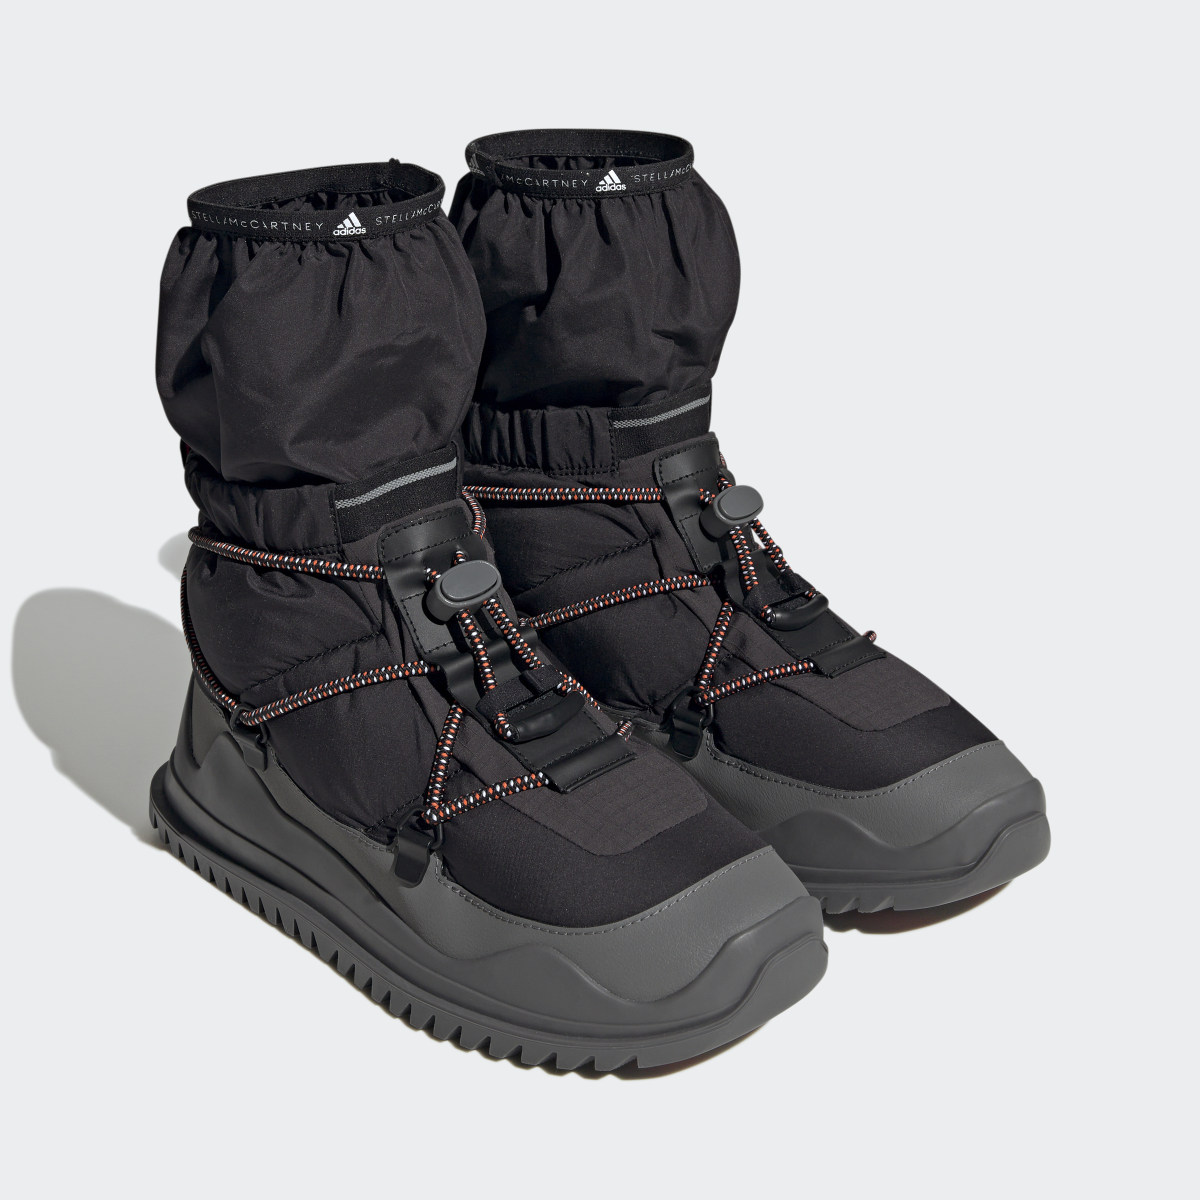 Adidas by Stella McCartney Winter COLD.RDY Boot. 5